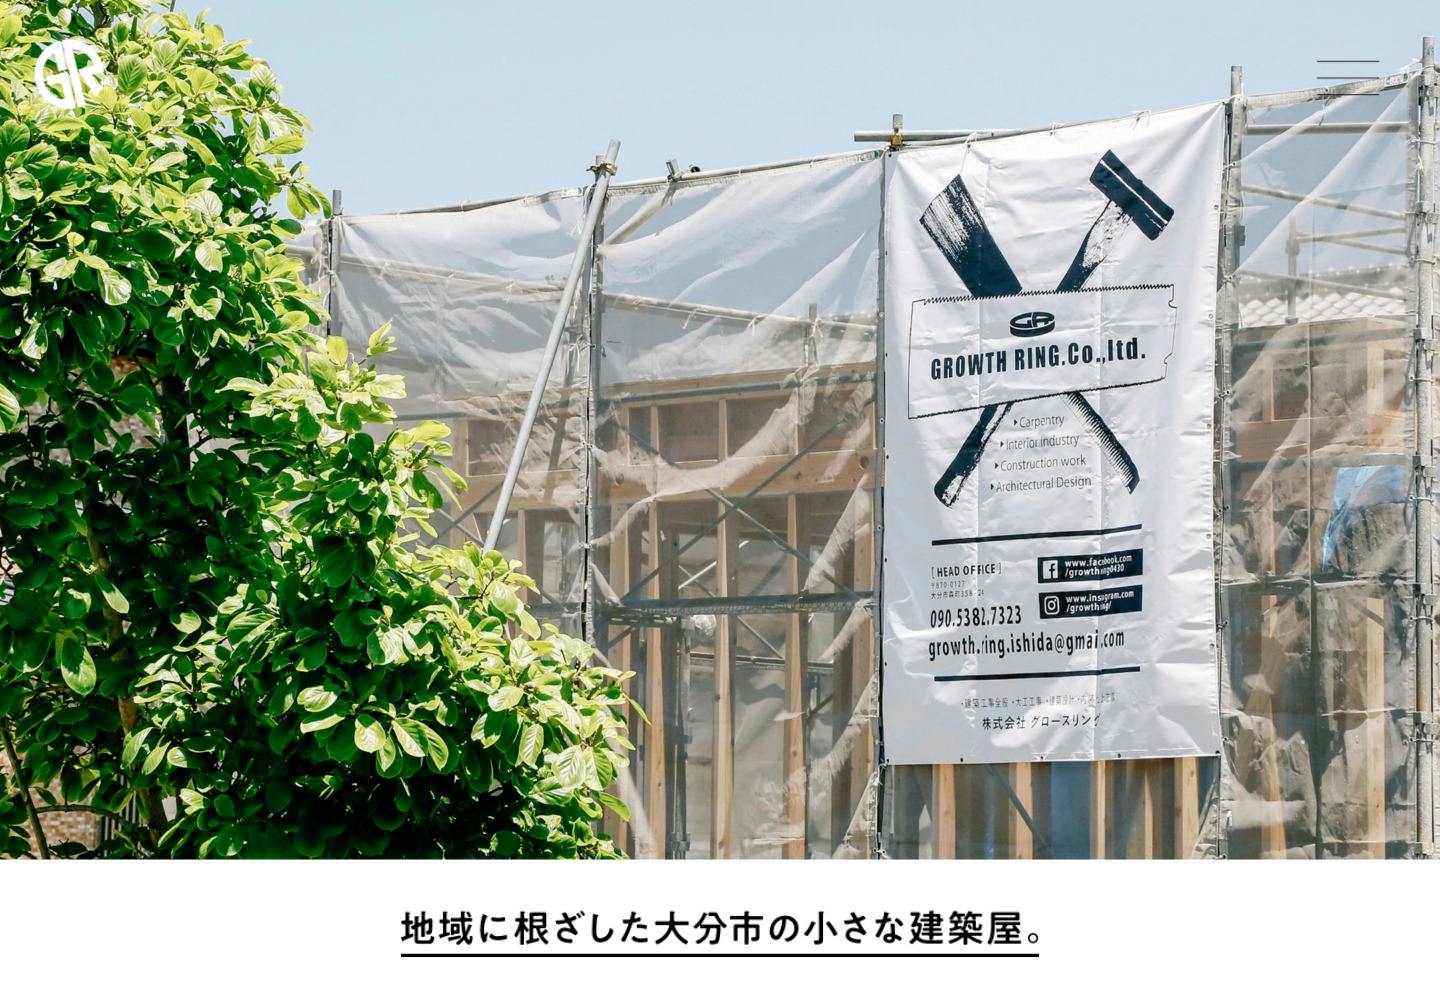 Cover Image for 株式会社GROWTH RING – グロースリング | 大分・建築・設計・施工・リフォーム